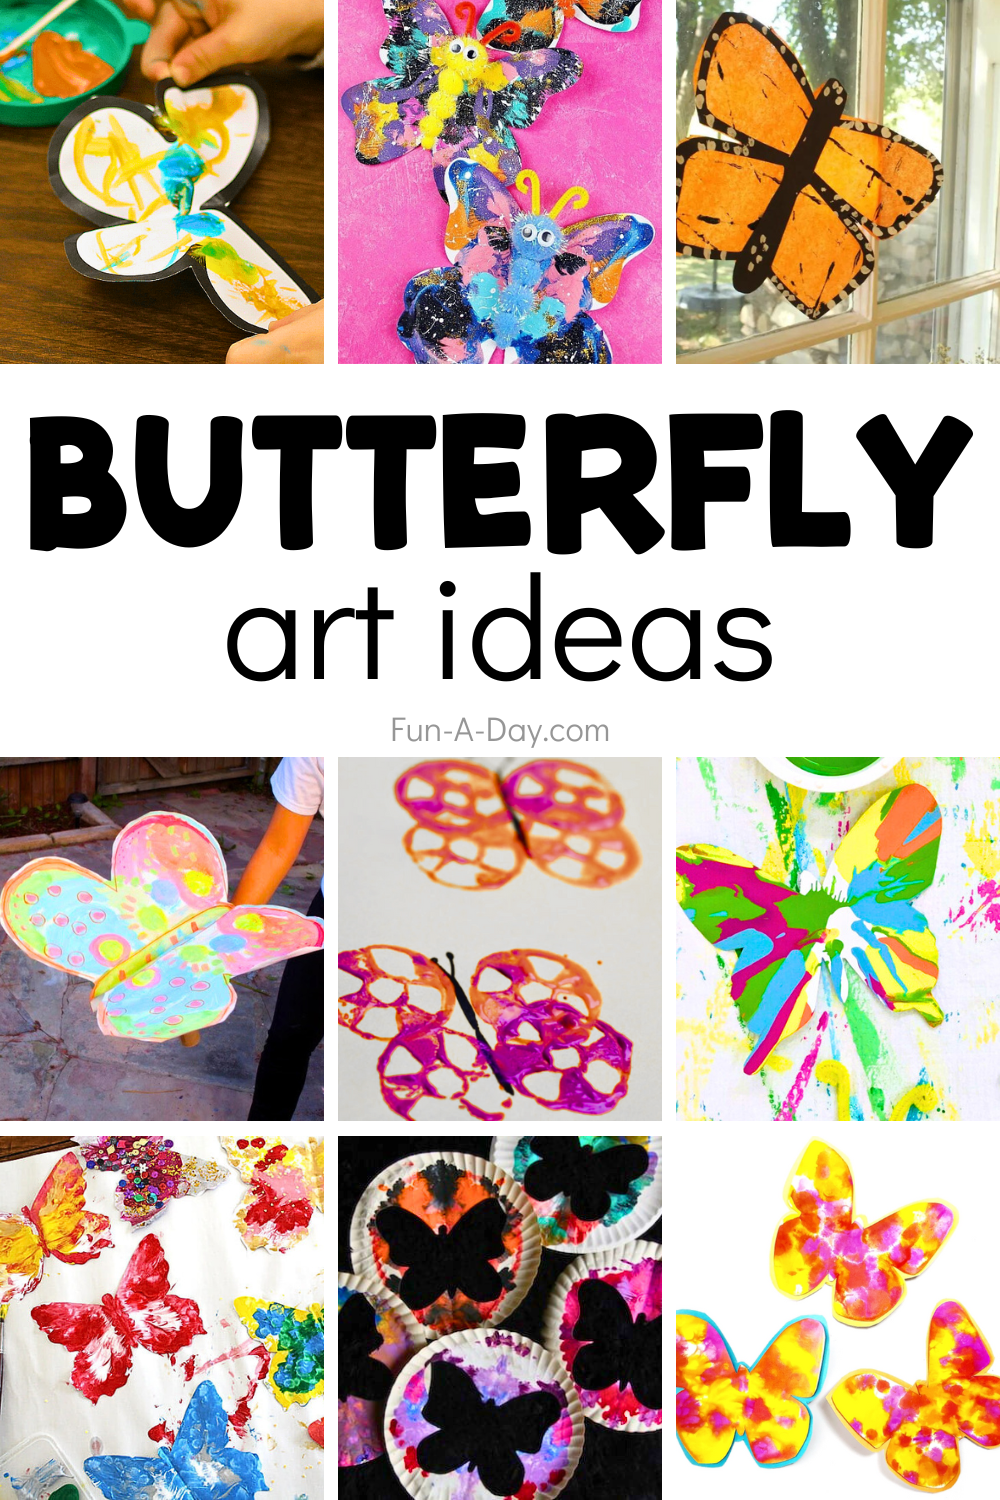 9 butterfly art ideas with text that reads butterfly art ideas.